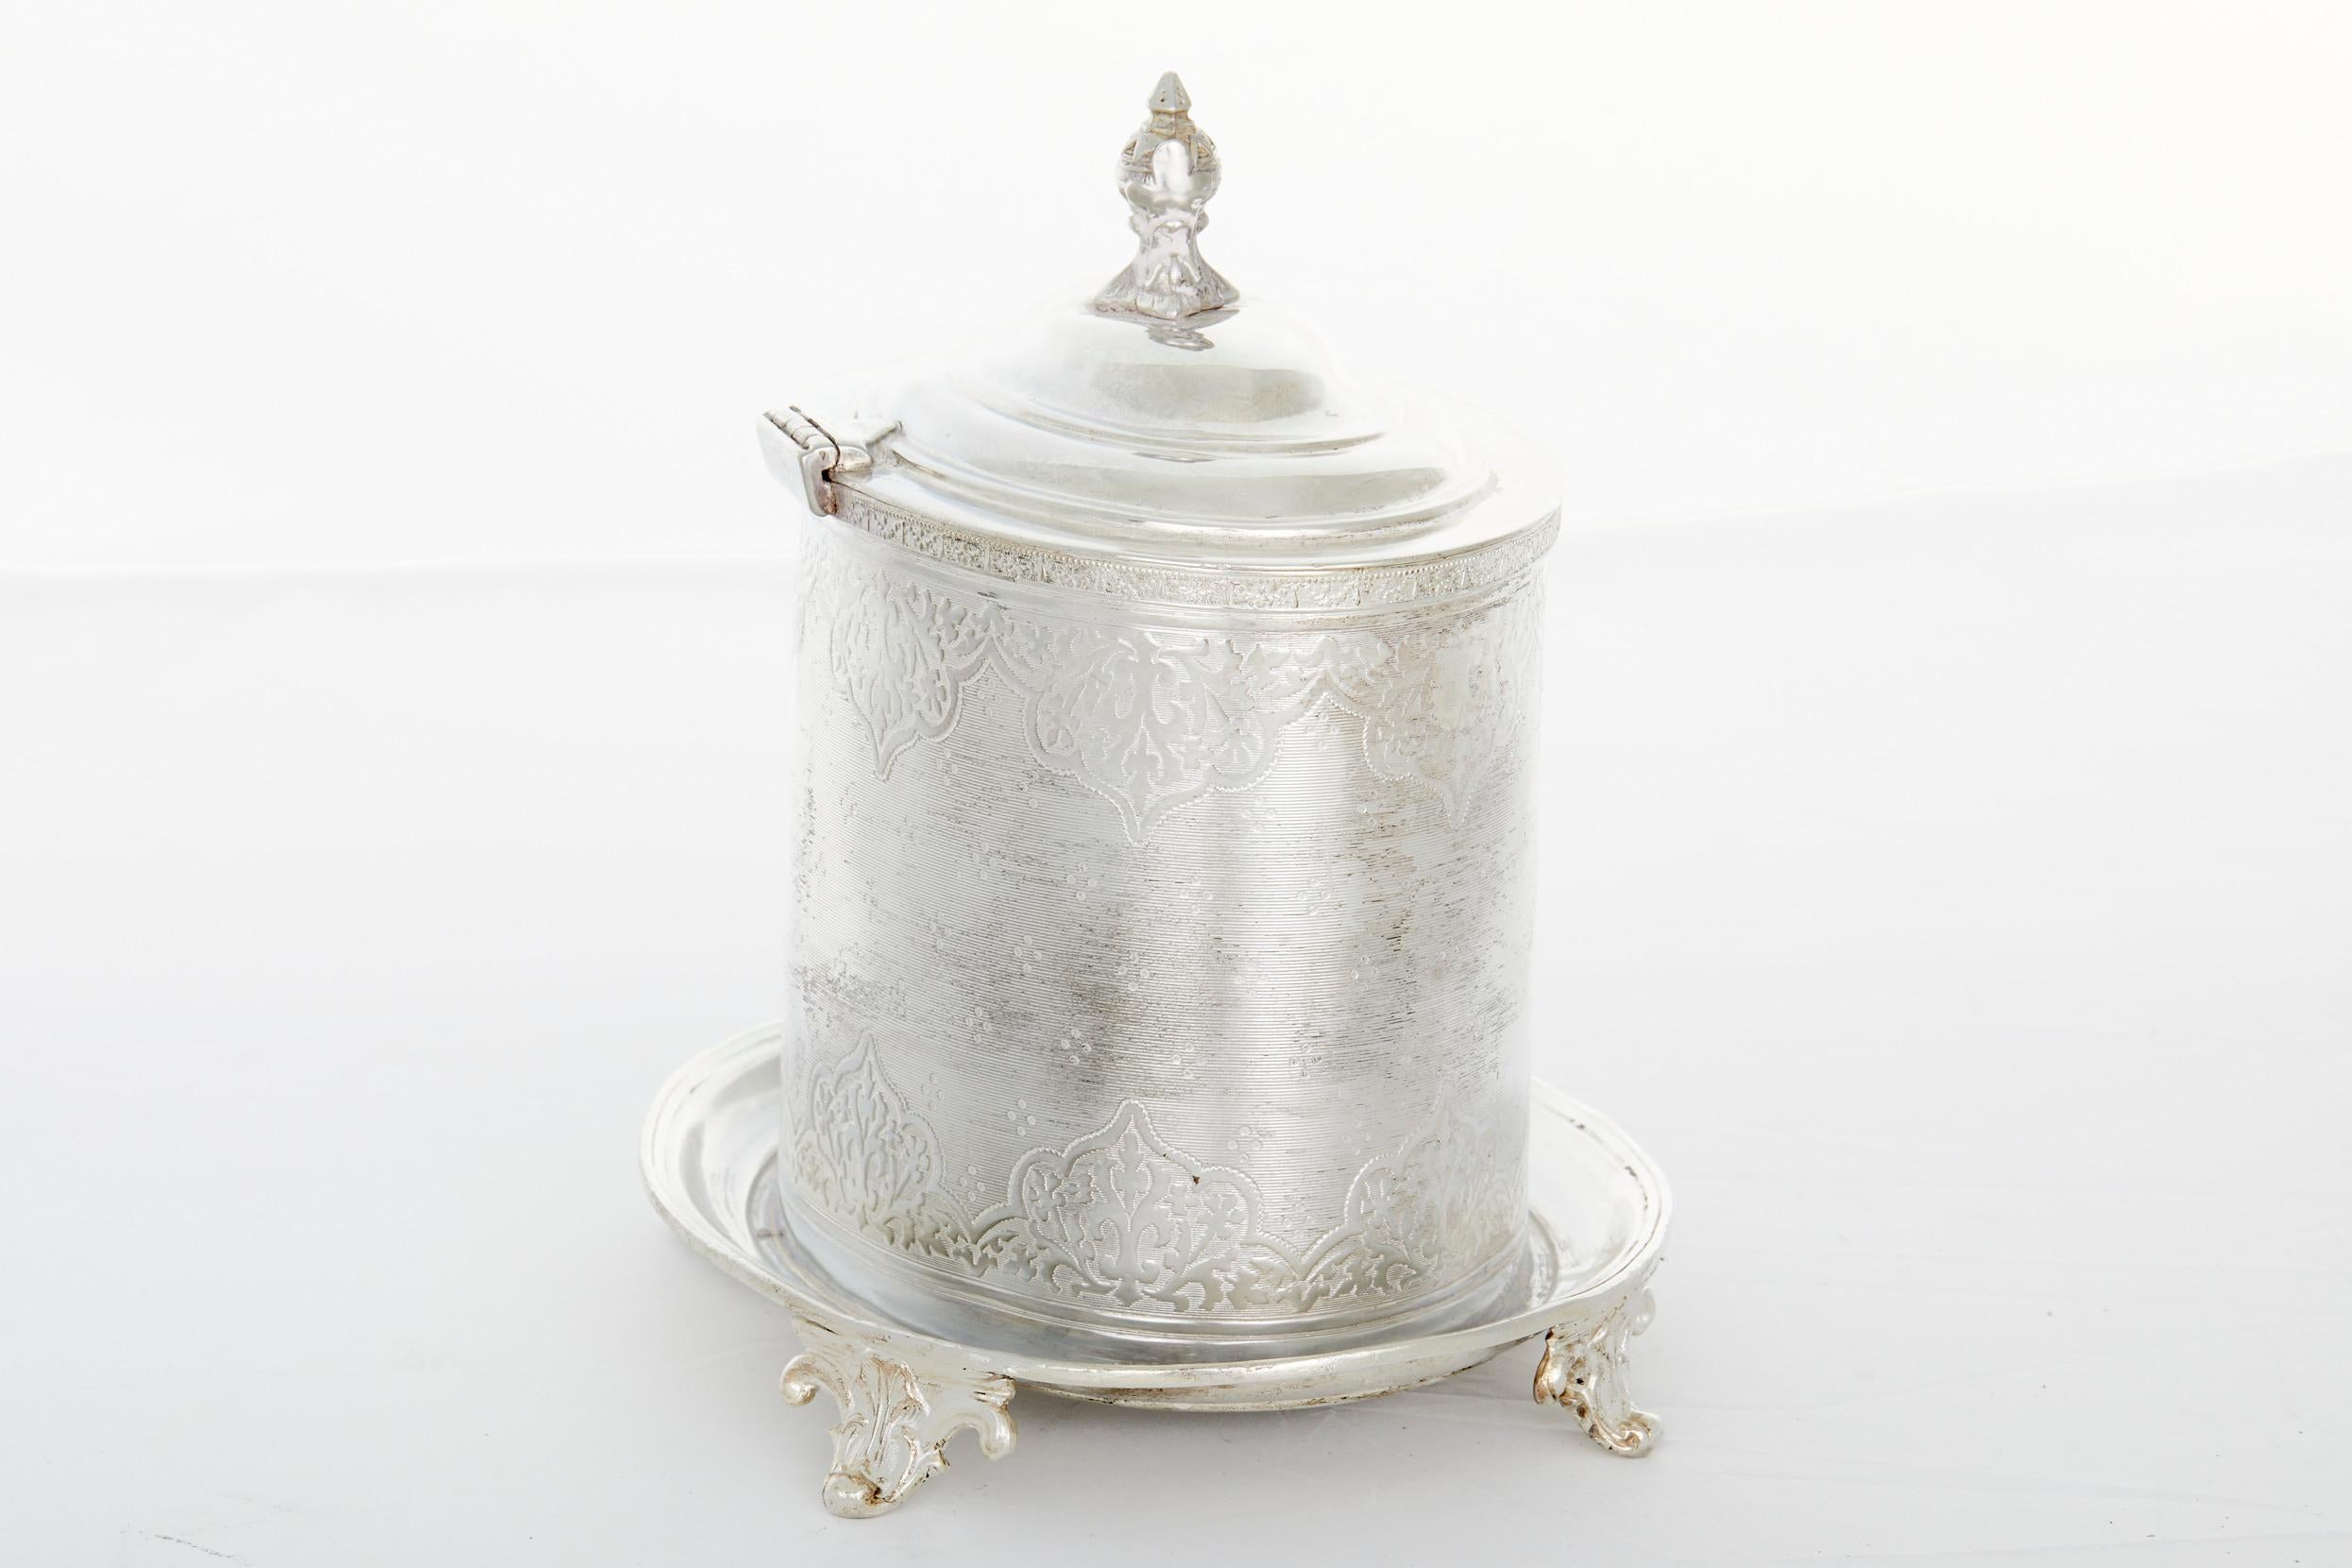 English sheffield silver plate covered biscuit box / tea caddy with exterior design details and finial top cover . The tea caddy / box is in good condition . Minor wear consistent with age / use . Maker's mark undersigned . Minor bent to the holding